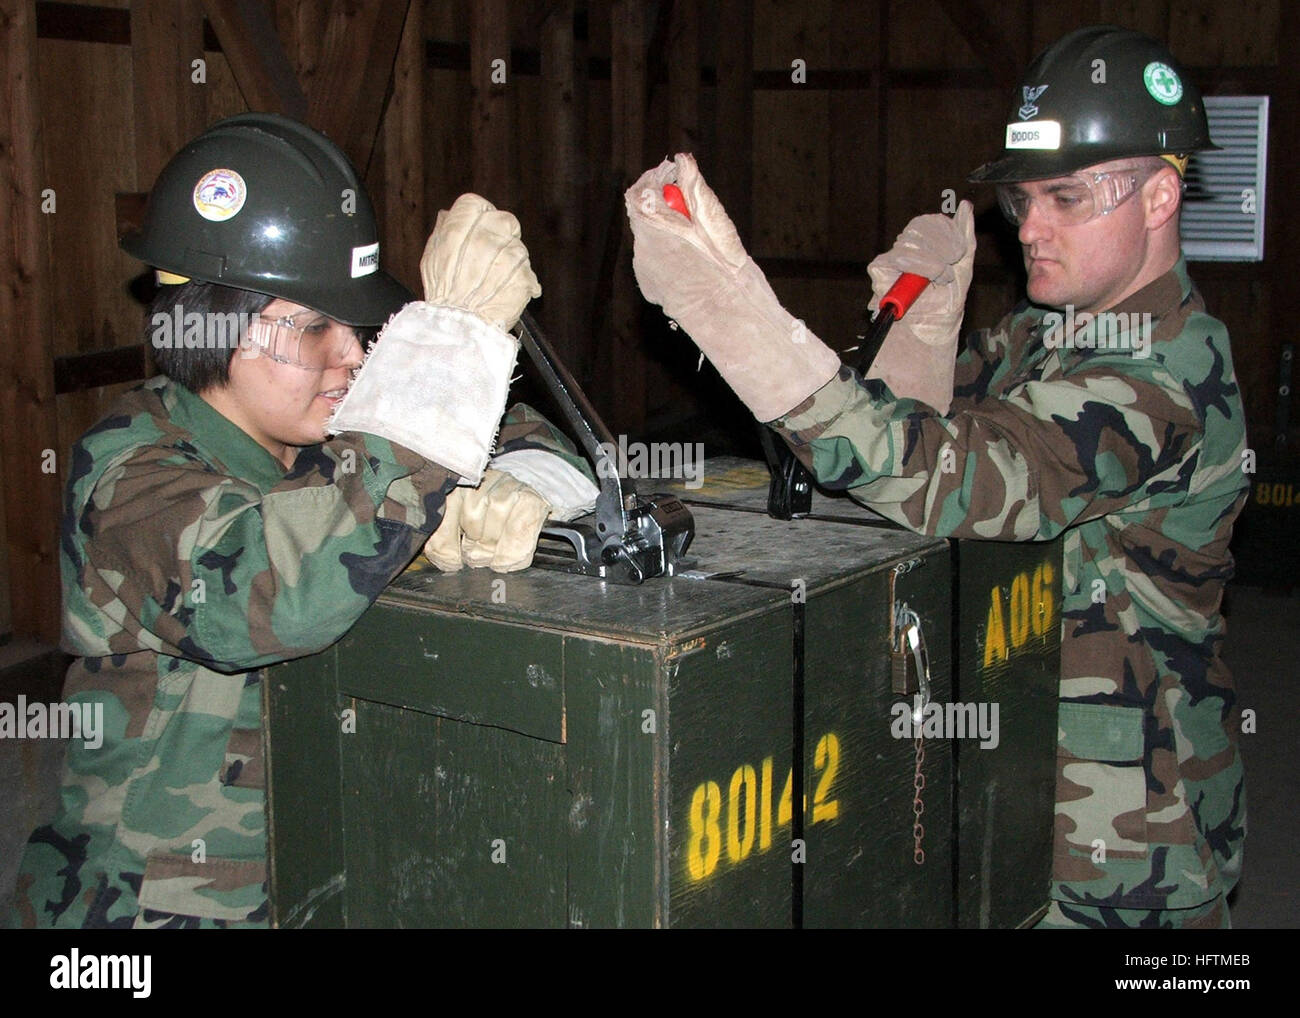 071222-N-8547M-008 IWAKUNI, Japan (Dec. 22, 2007) Builder Constructionman Loren Mitre and Builder 2nd Class Thad Dodds, both of Naval Mobile Construction Battalion (NMCB) 5, Detail Iwakuni, band crates and load them into a conex box for shipment back to Port Hueneme, Calif., during the close out of the Detail Iwakuni site. NMCB-5 is deployed to 11 locations to provide construction support in the Pacific Command’s area of responsibility. U.S. Navy photo by Mass Communication Specialist 3rd Class Patrick W. Mullen III (Released) US Navy 071222-N-8547M-008 Builder Constructionman Loren Mitre and  Stock Photo